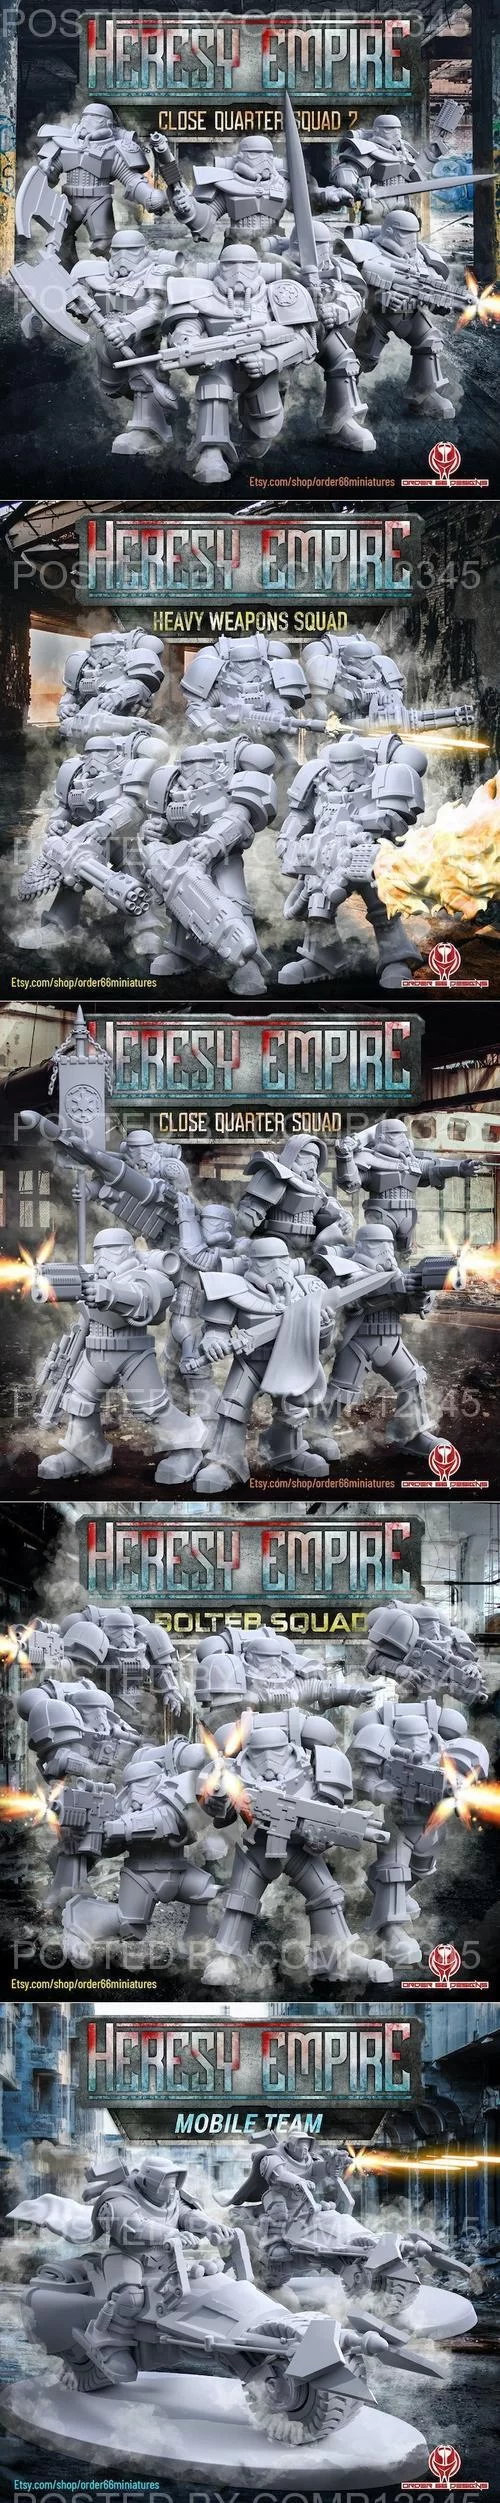 Heresy Empire Miniatures Pack 3D Print